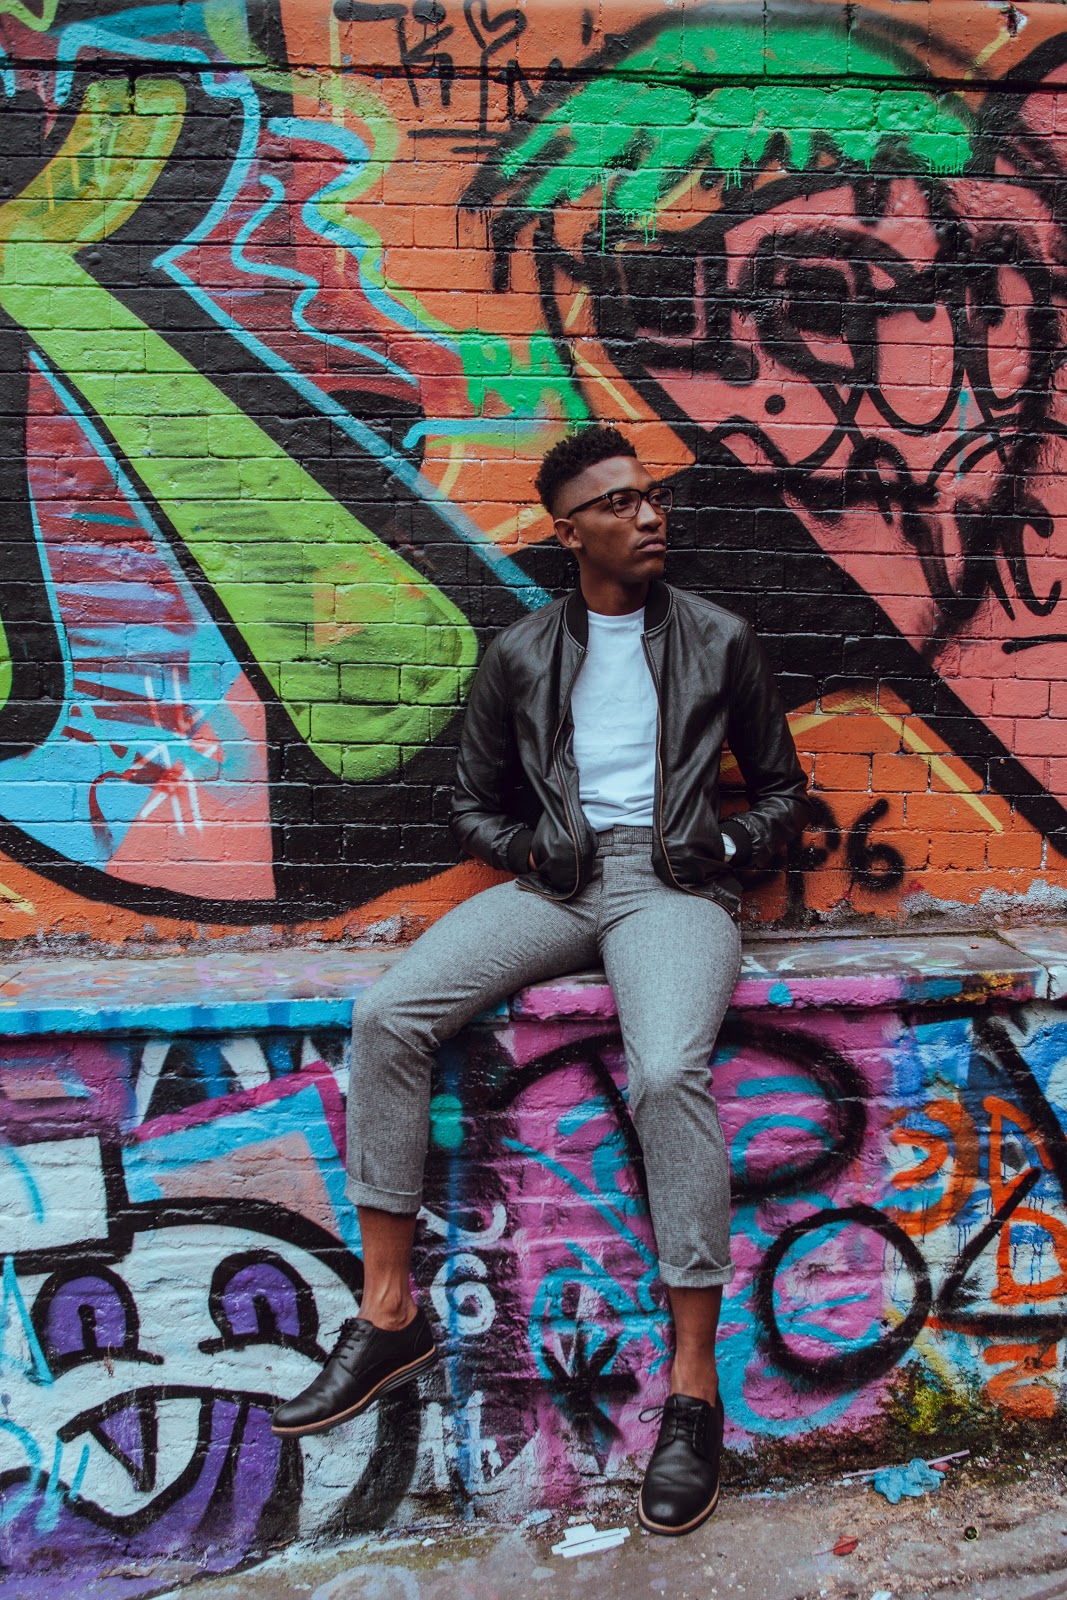 A young man casually sits on a ledge with graffiti behind him. He is wearing a leather bomber jacket, white shirt, grey pants, and black oxford shoes.